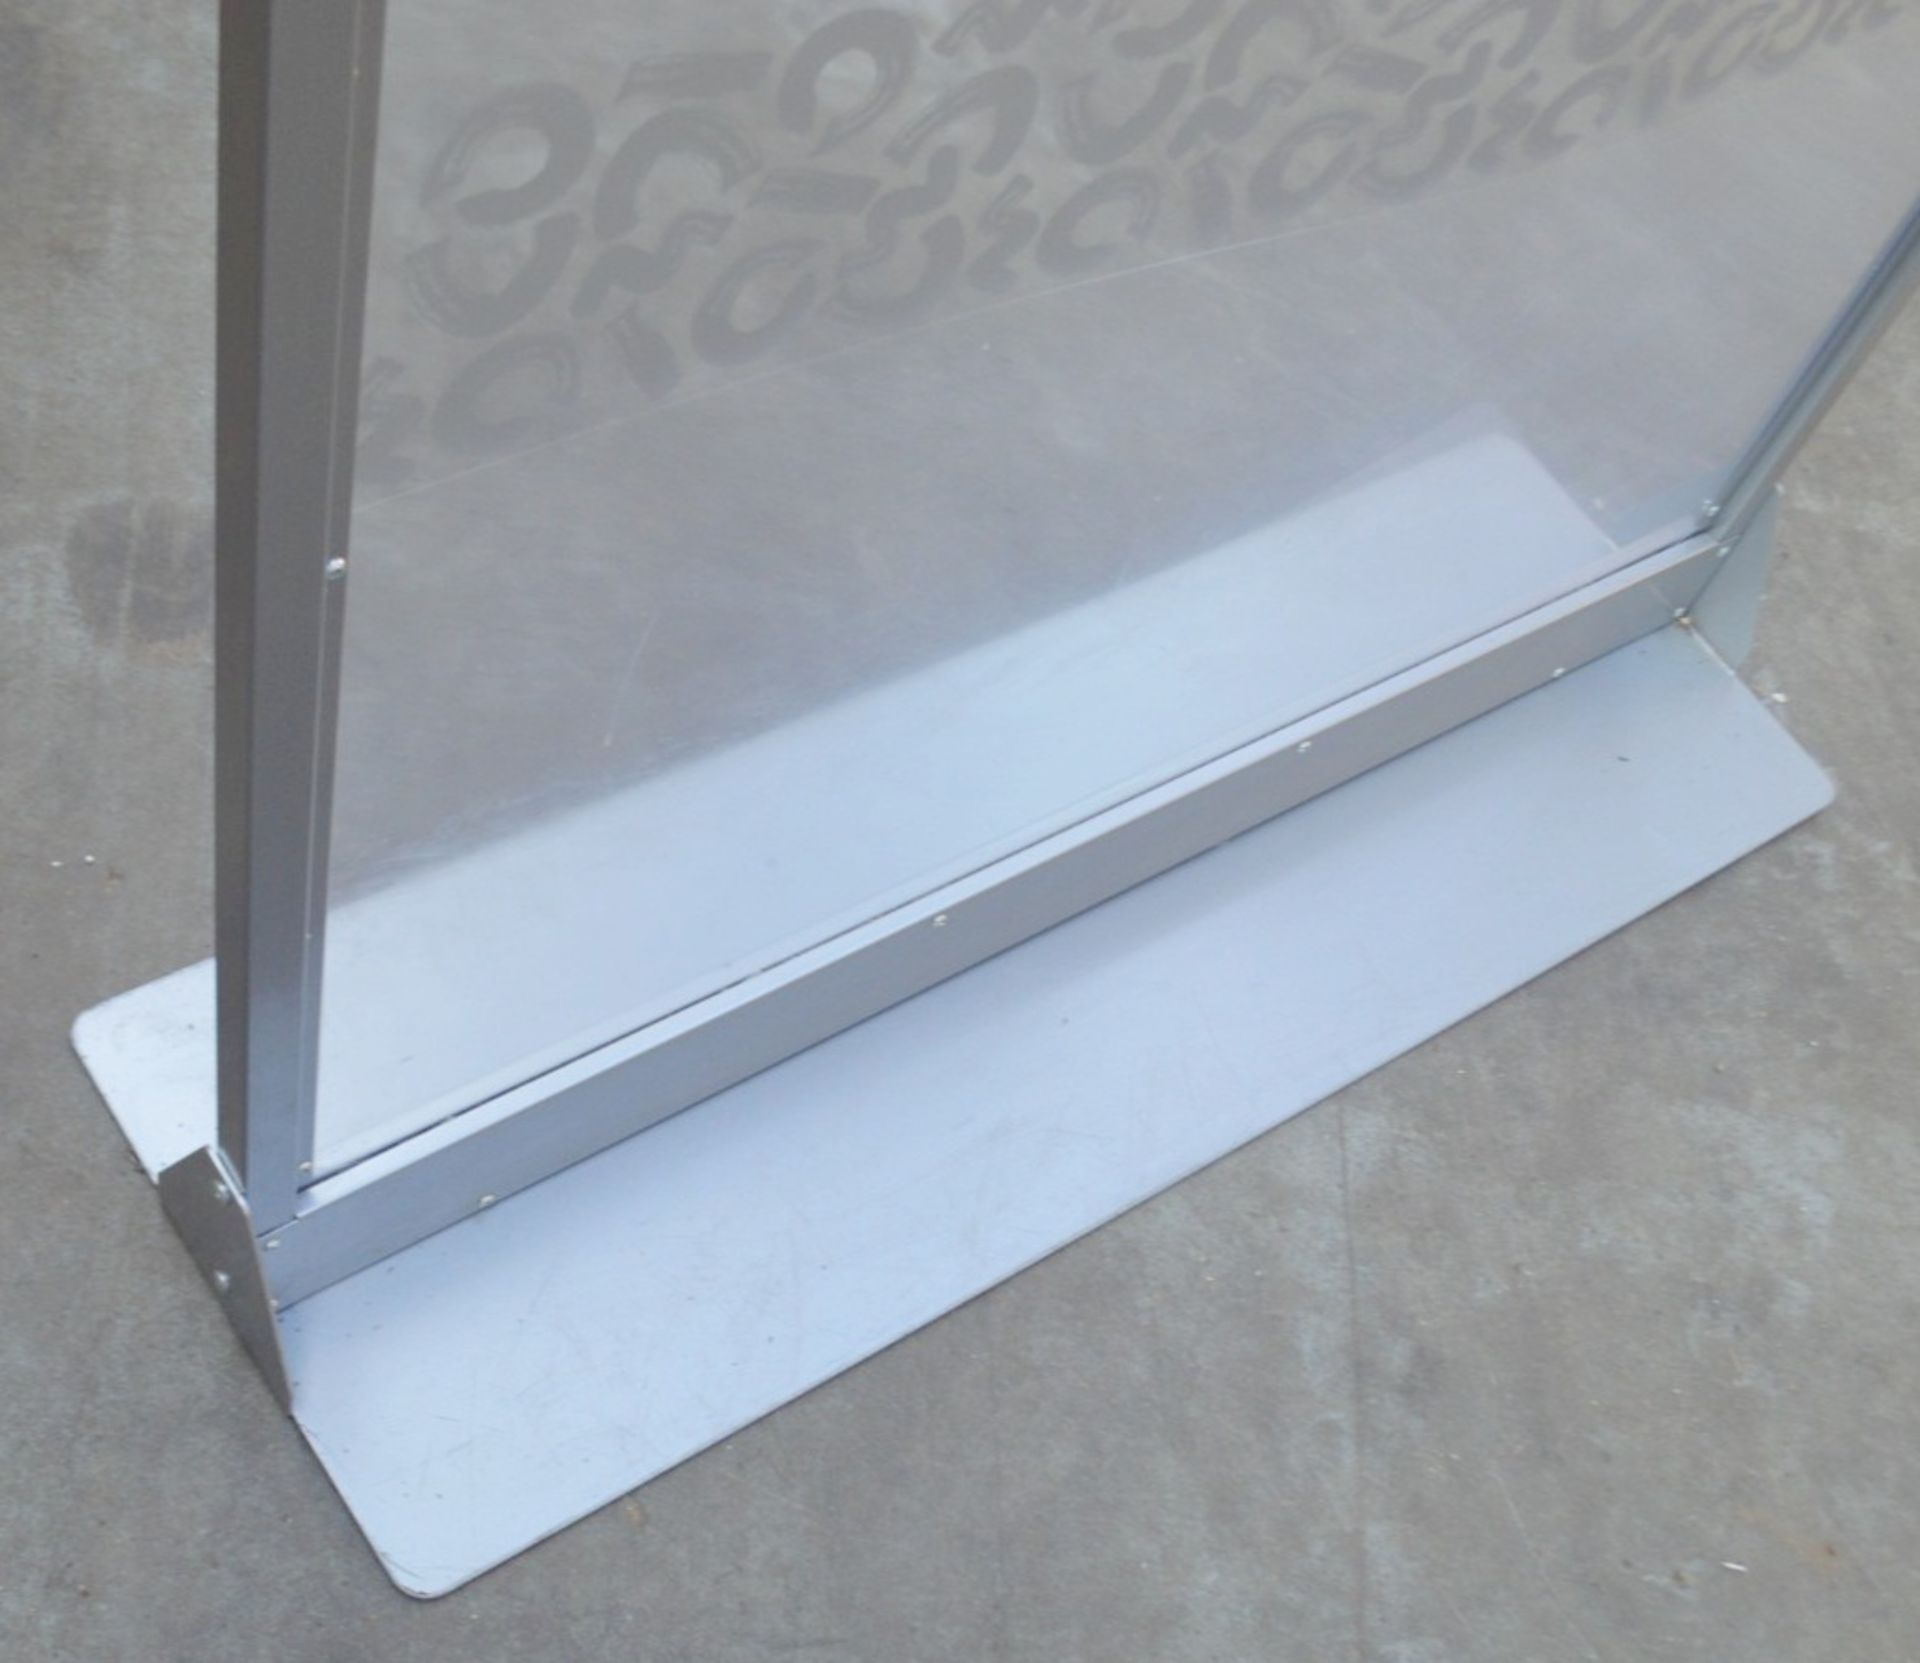 A Pair Of Freestanding 1.5-Metre Tall Protective Clear Acrylic Checkout Screen Dividers - Image 3 of 3